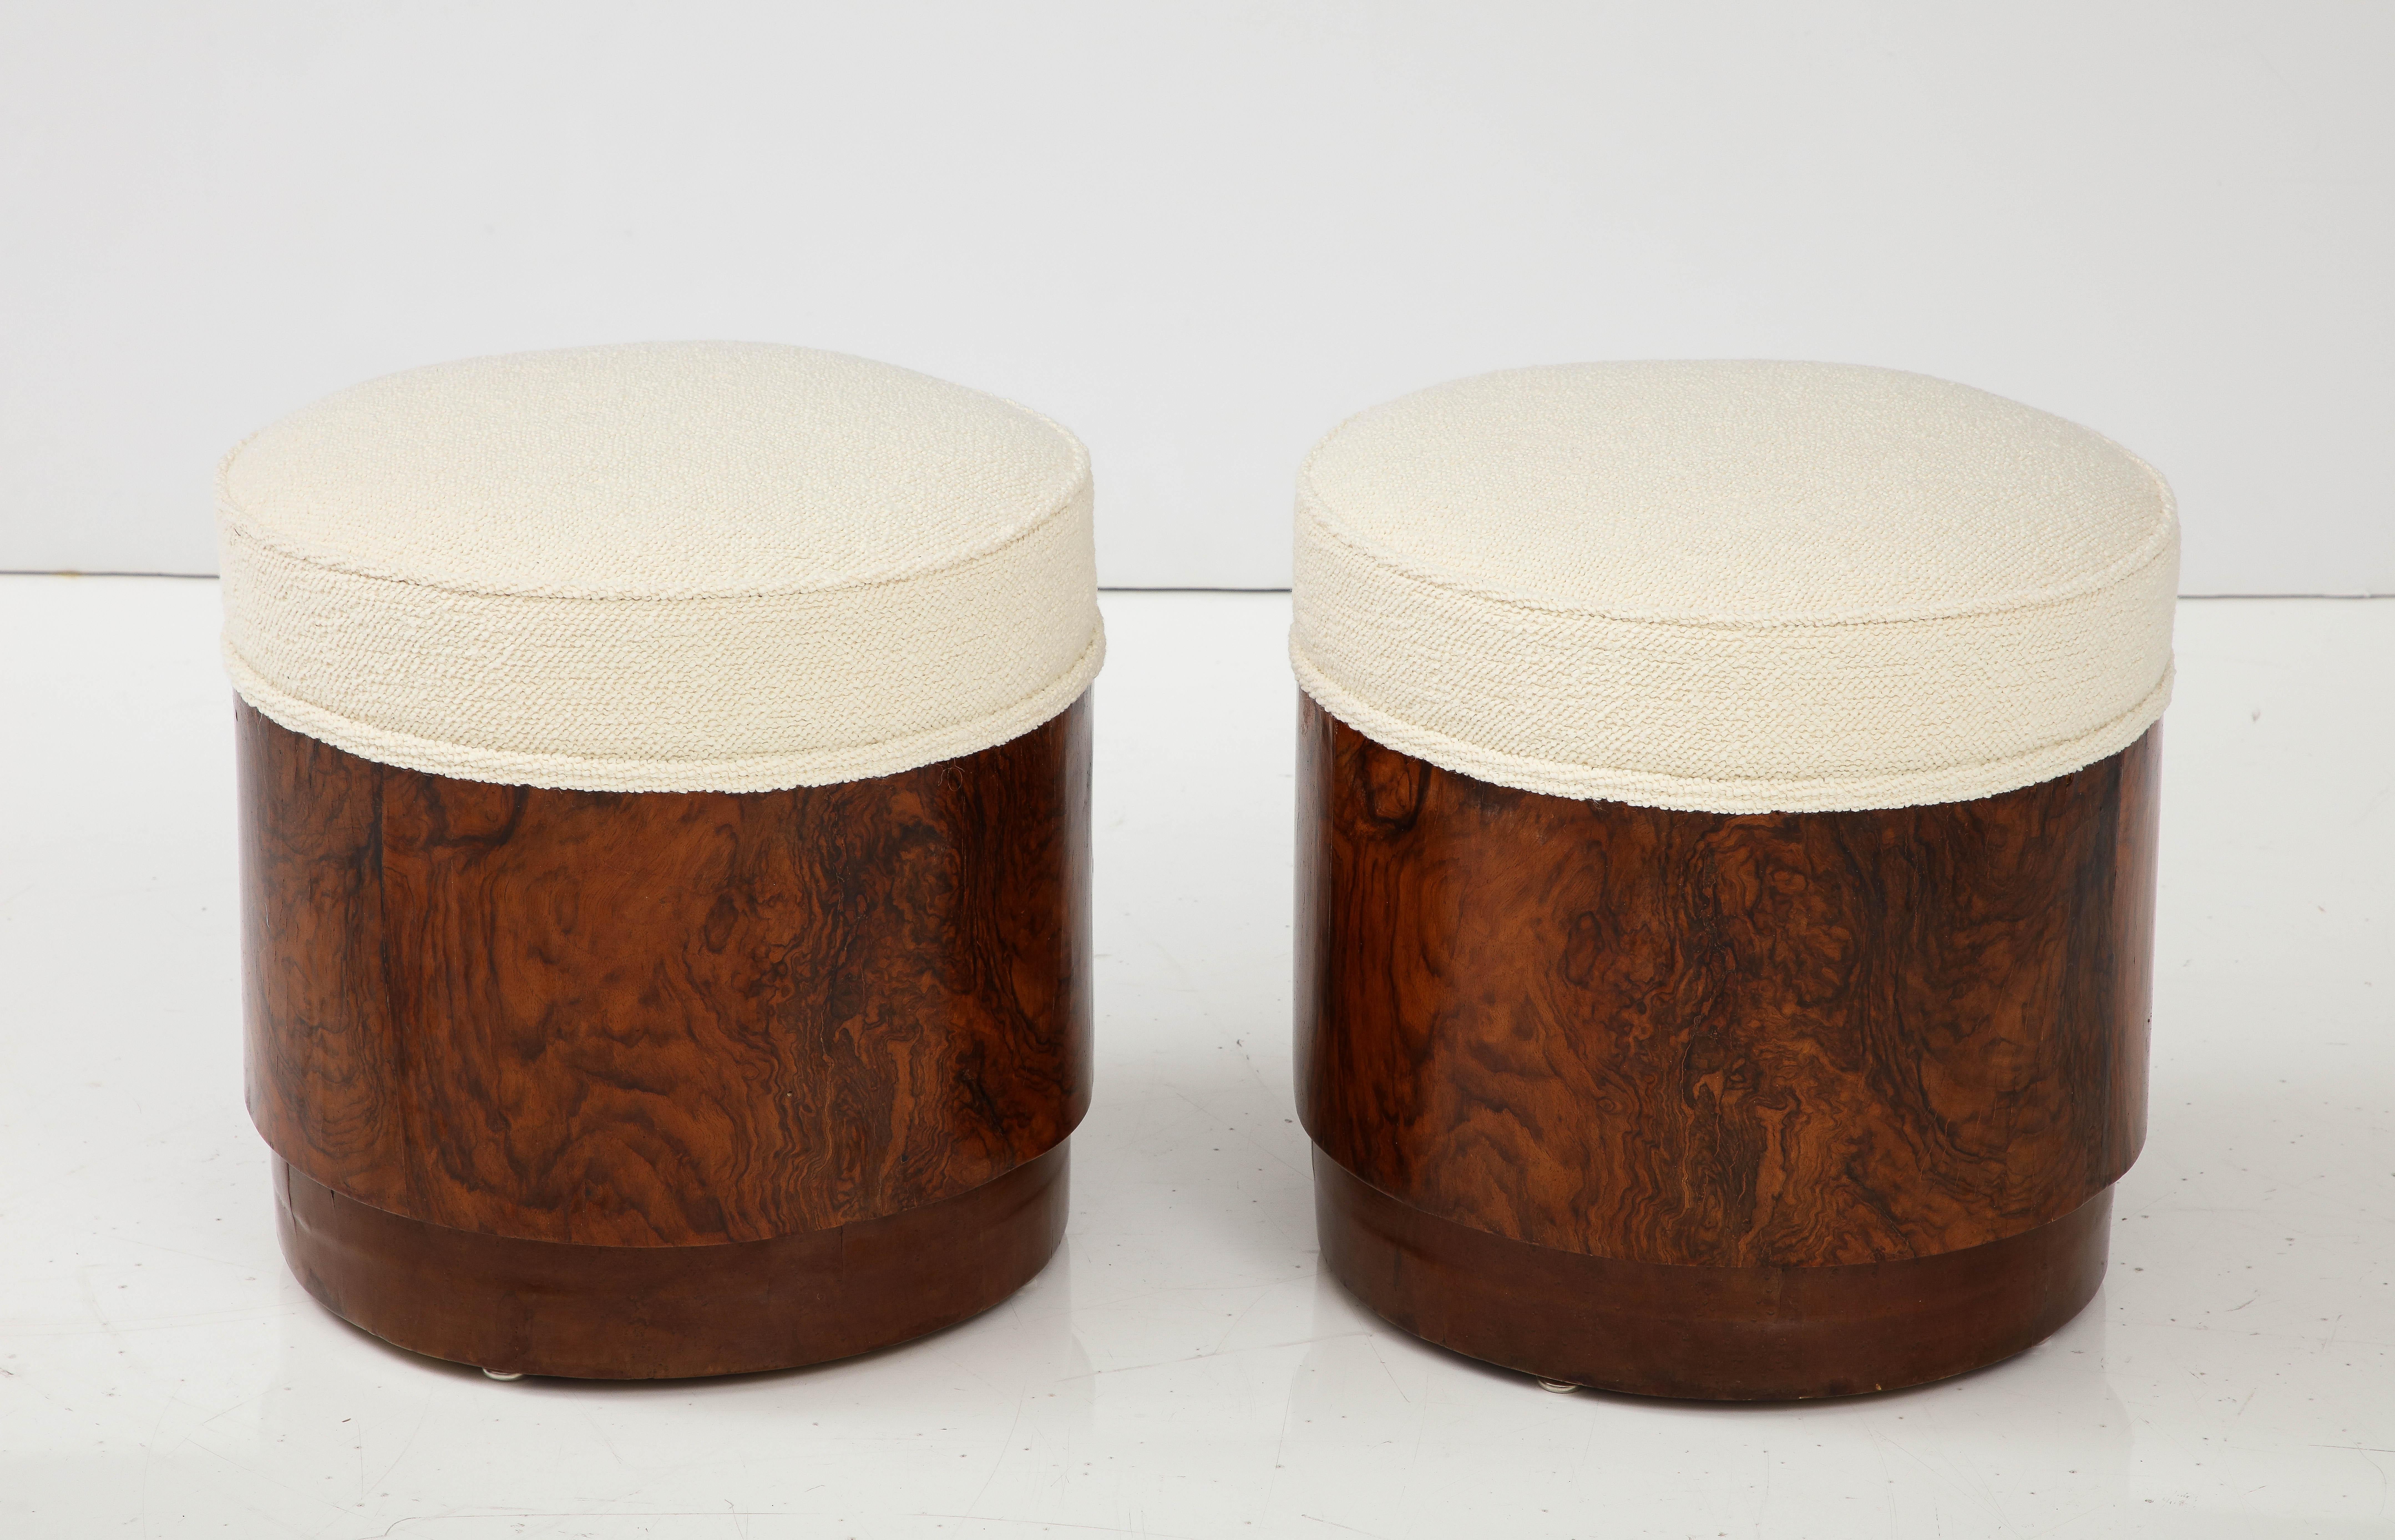 Pair of Italian Art Deco burl wood circular stools, the beautiful rich wood contrasts nicely with the newly upholstered seats in European cream textured cotton.  The base  with an elegantly tapered form. 
Italy circa 1940 
Size: 15